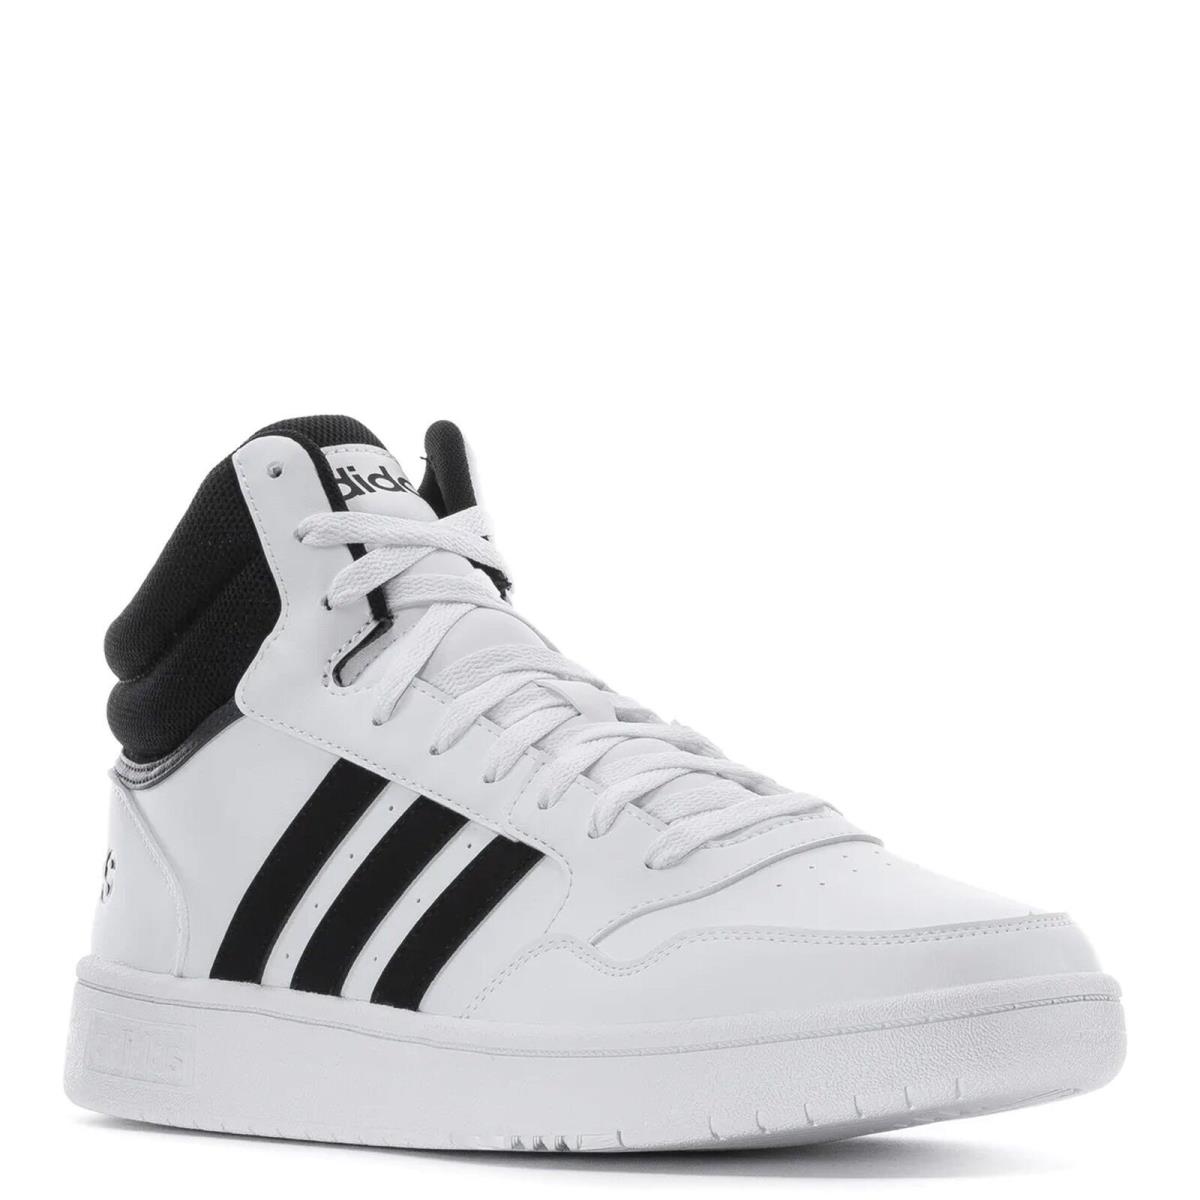 Adidas Hoops 3.0 Men s Mid High Top Basketball Sneaker Shoes - White